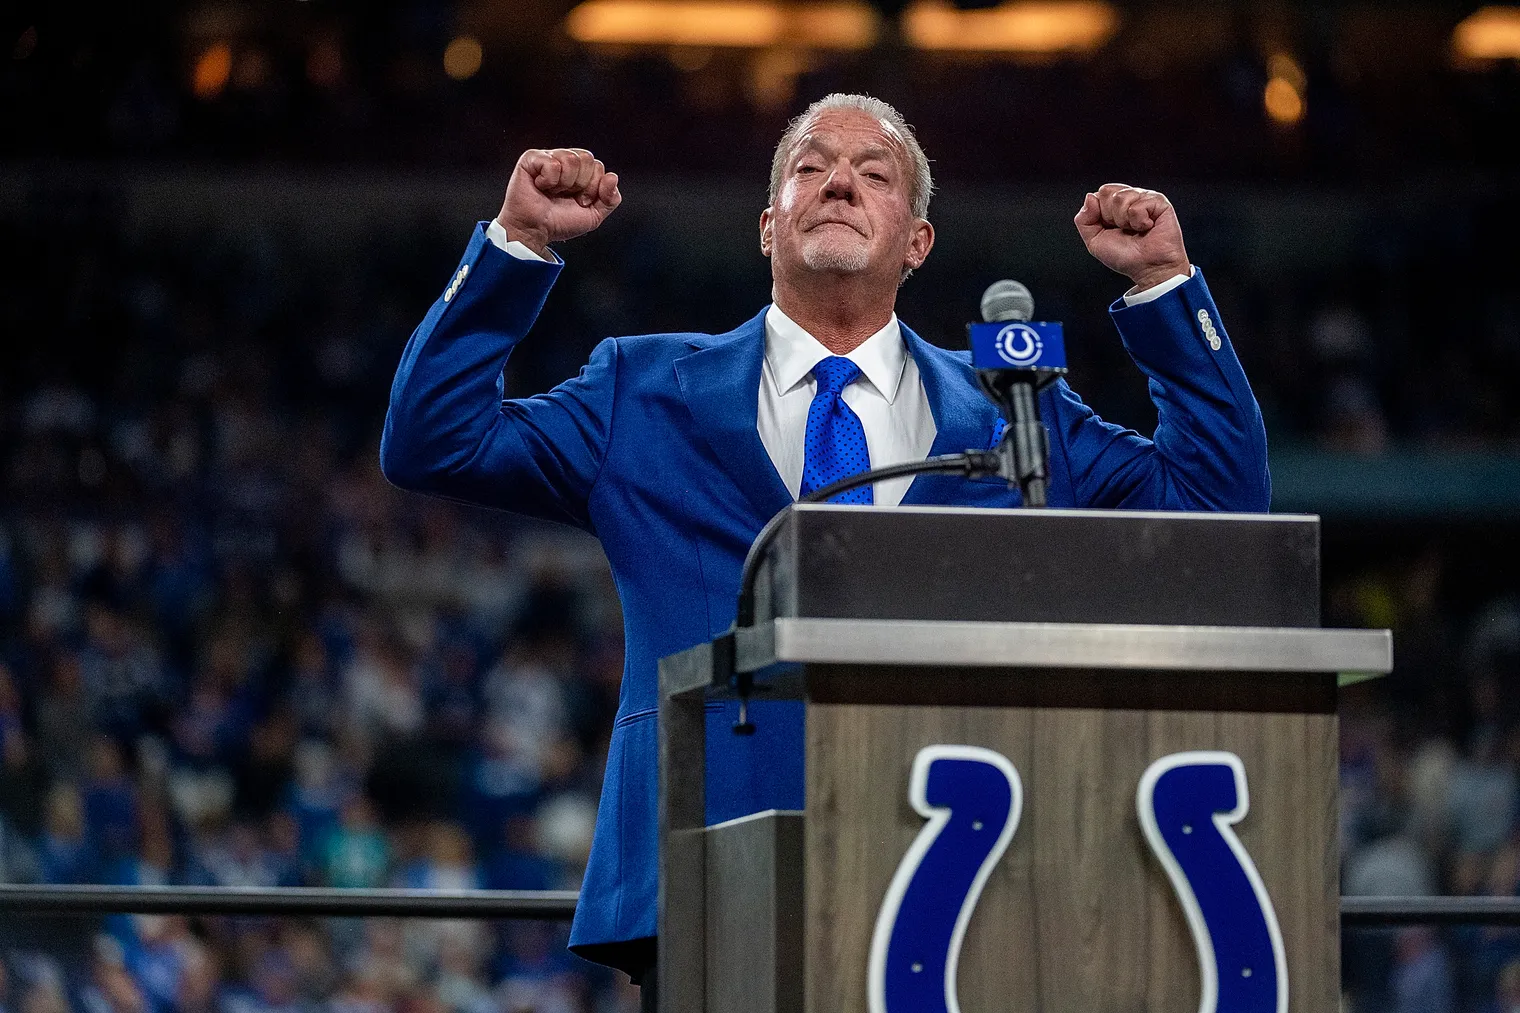 Colts Owner Jim Irsay Throws Jab At NFL RBs; Agent Of Jonathan Taylor Responds